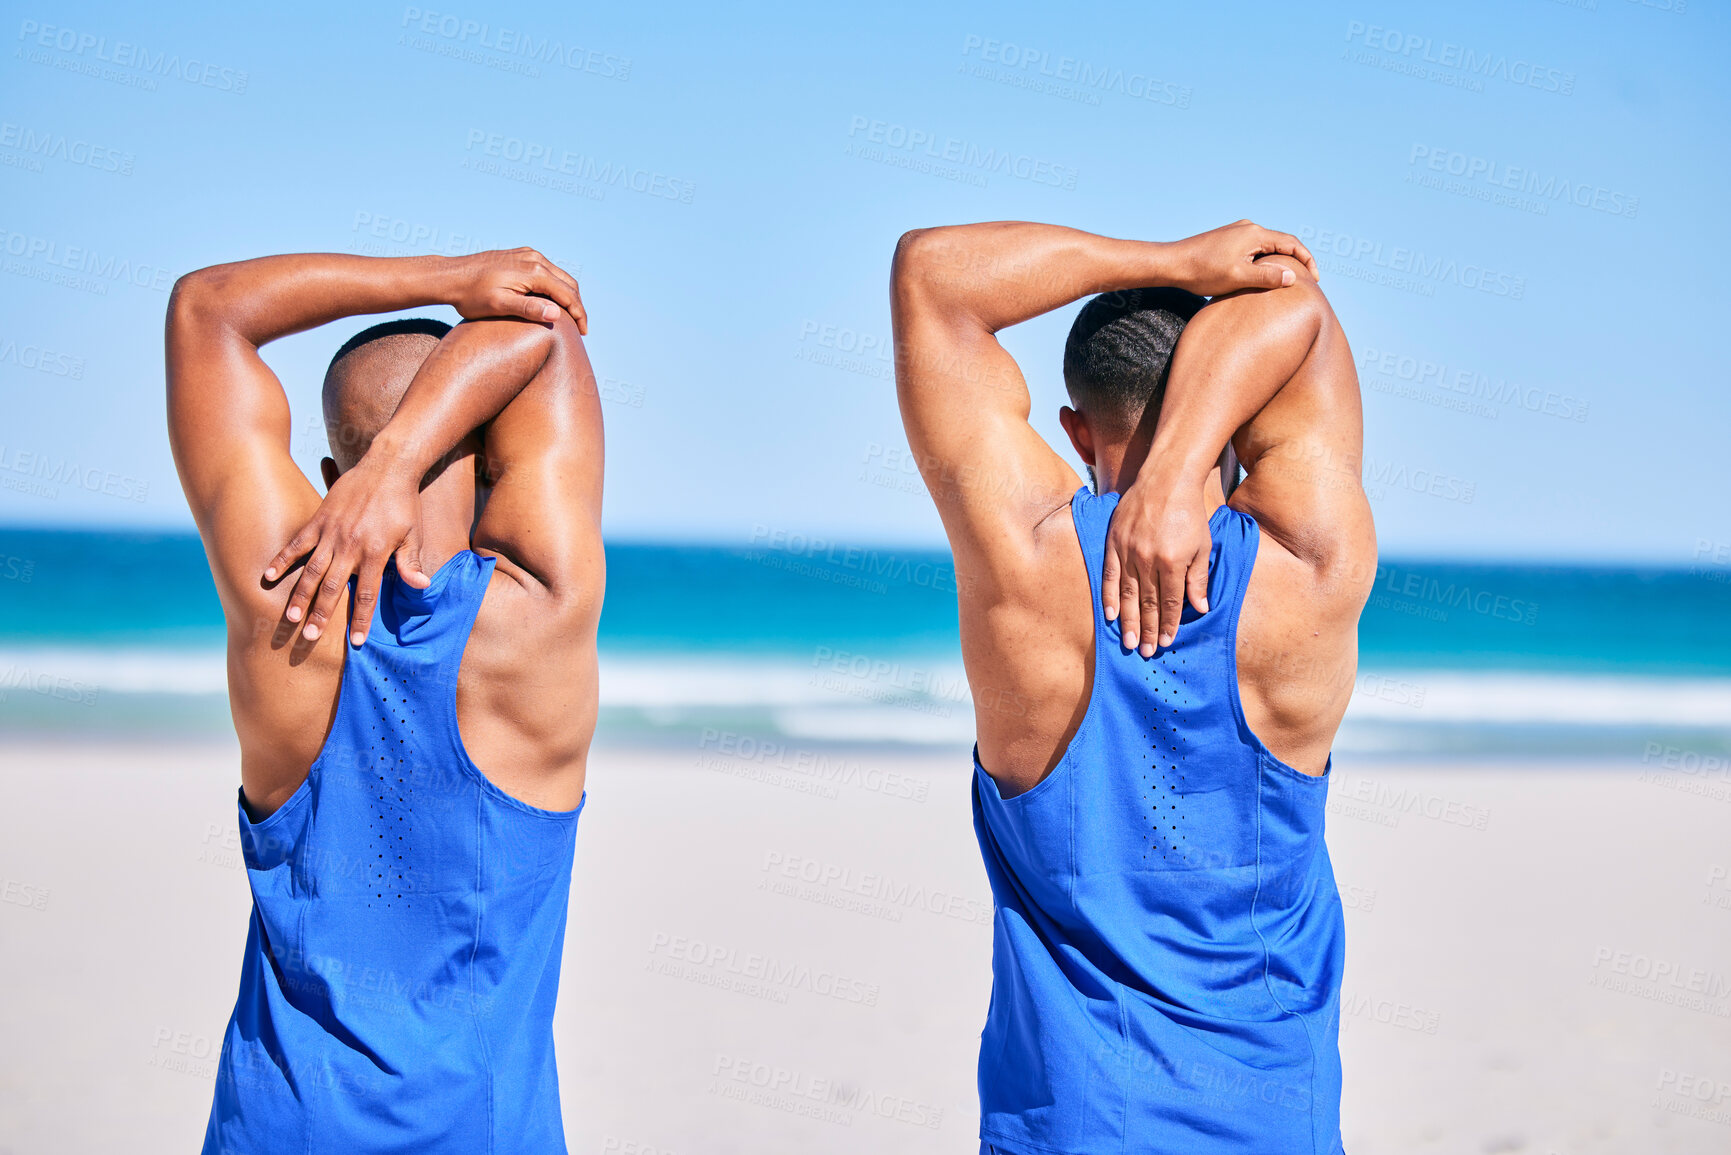 Buy stock photo Man, friends and stretching back in fitness on beach for workout, exercise or outdoor training in sports. Rear view of muscular, athlete or male person in body warm up together on the ocean coast